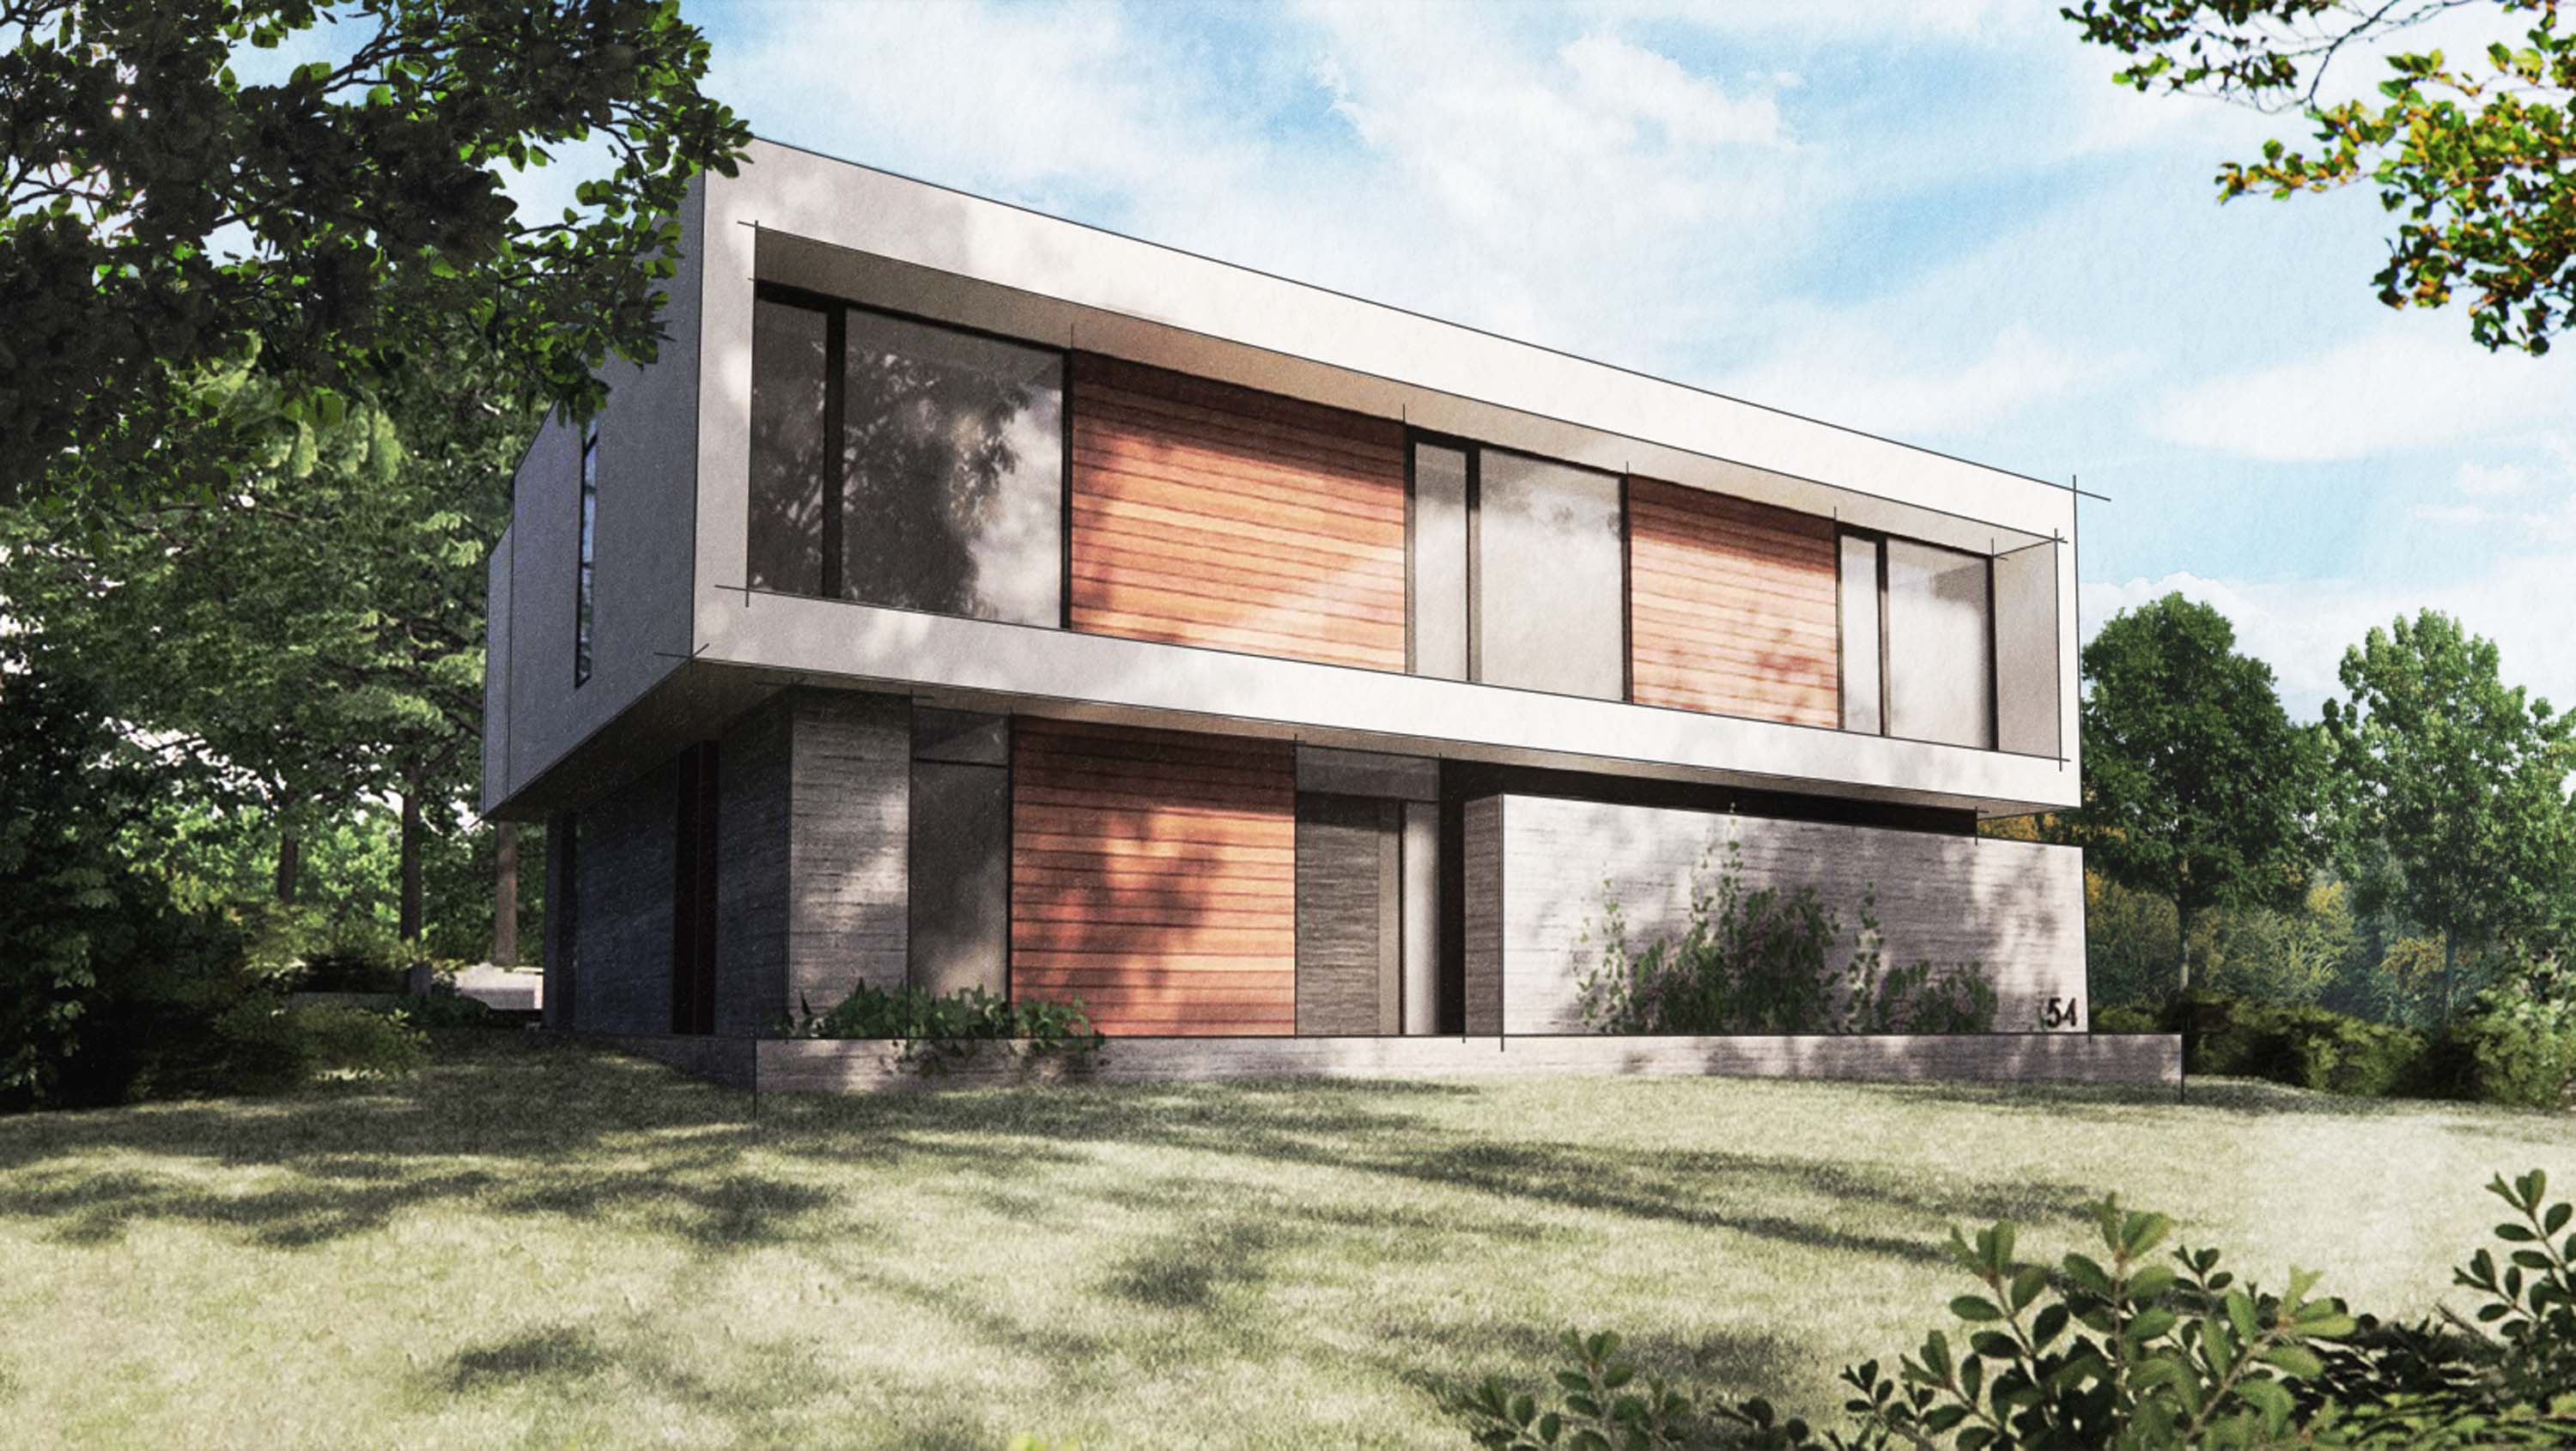 Exterior rendering showcasing the extensive use of warm materials like wood and stone of the Chatham House by Specht Novak Architects.